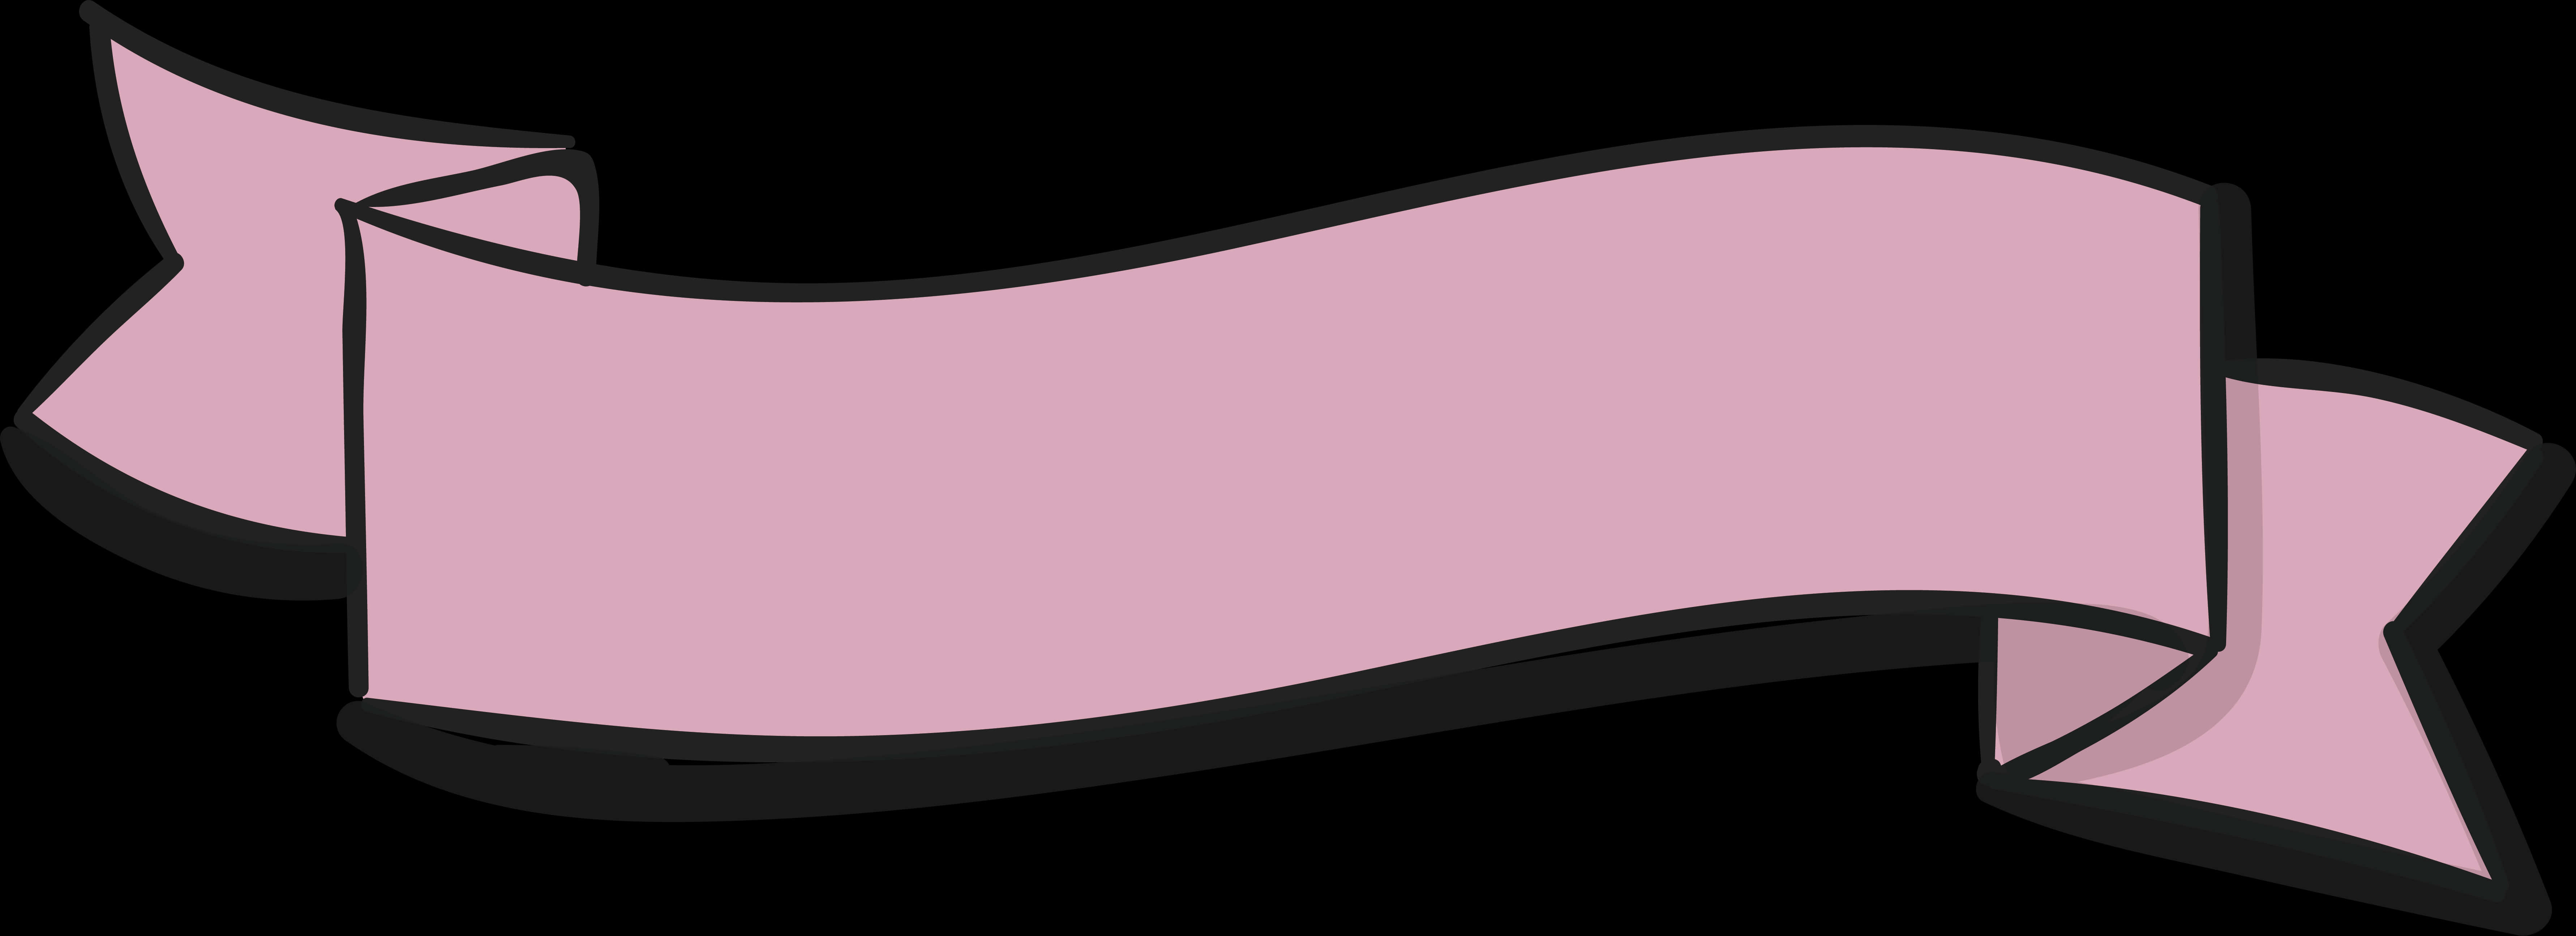 A Pink And Black Curved Object